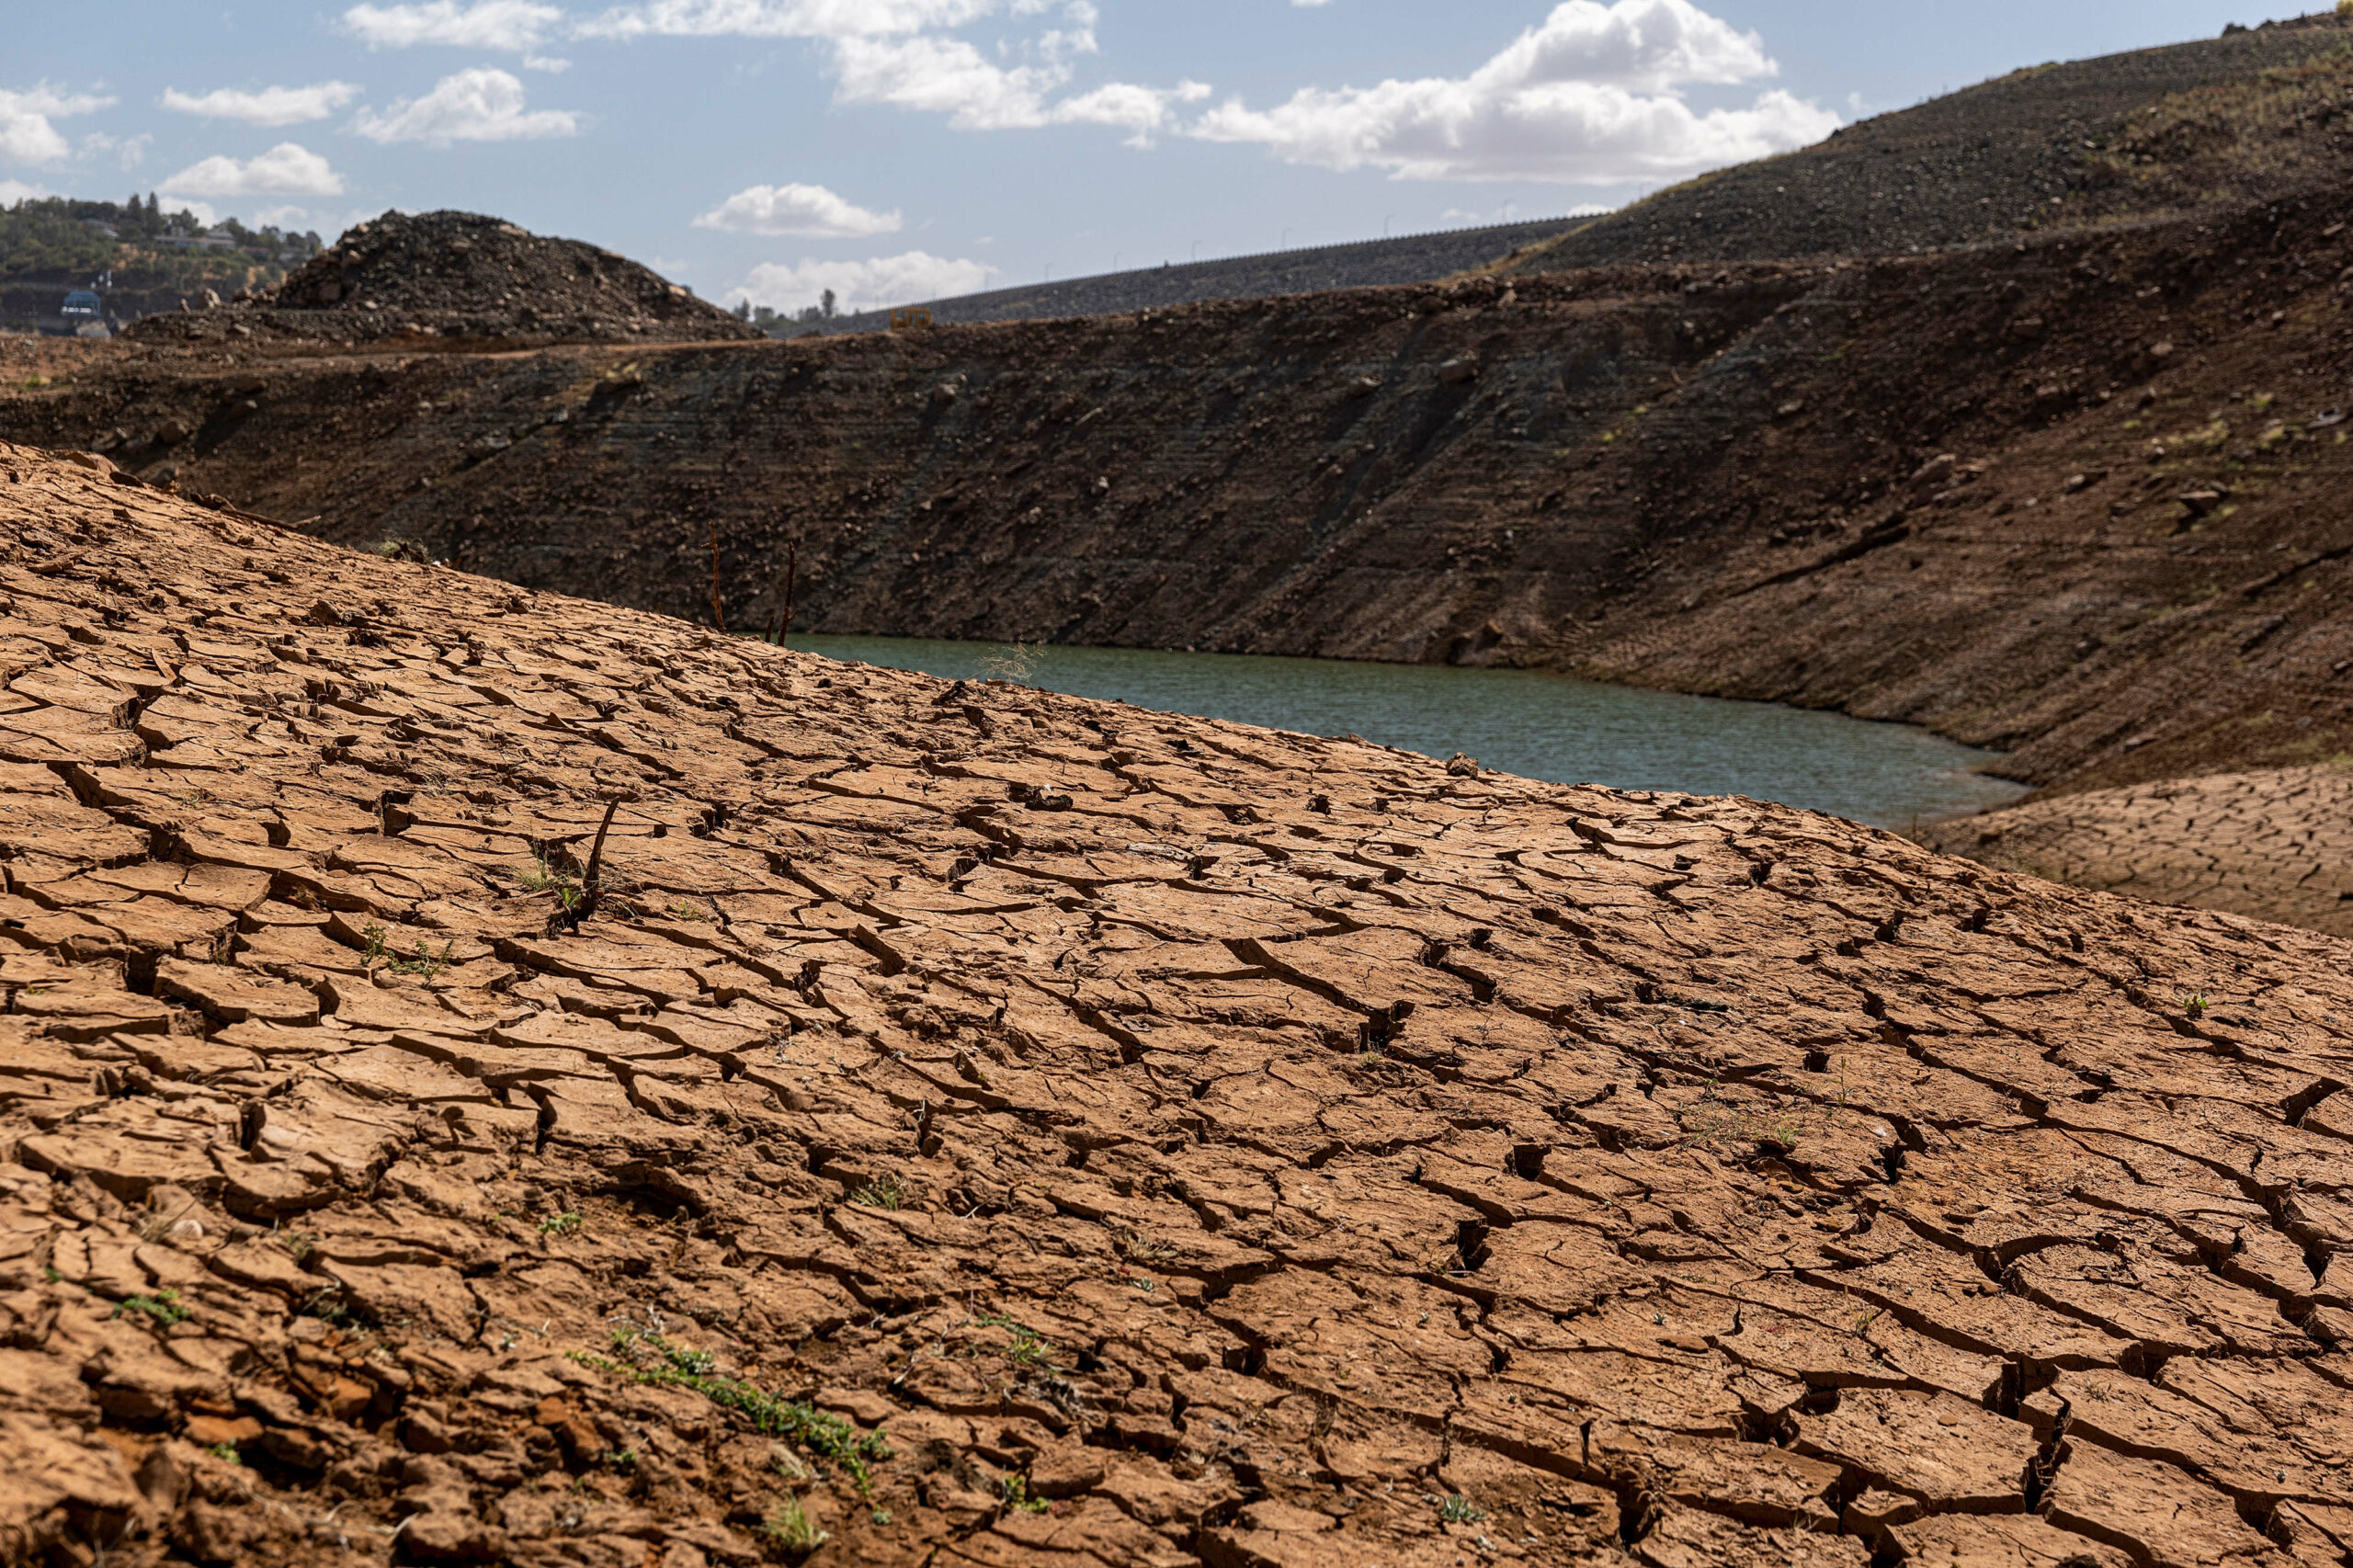 Drought fueled by climate change the worst in 1,200 years: scientists